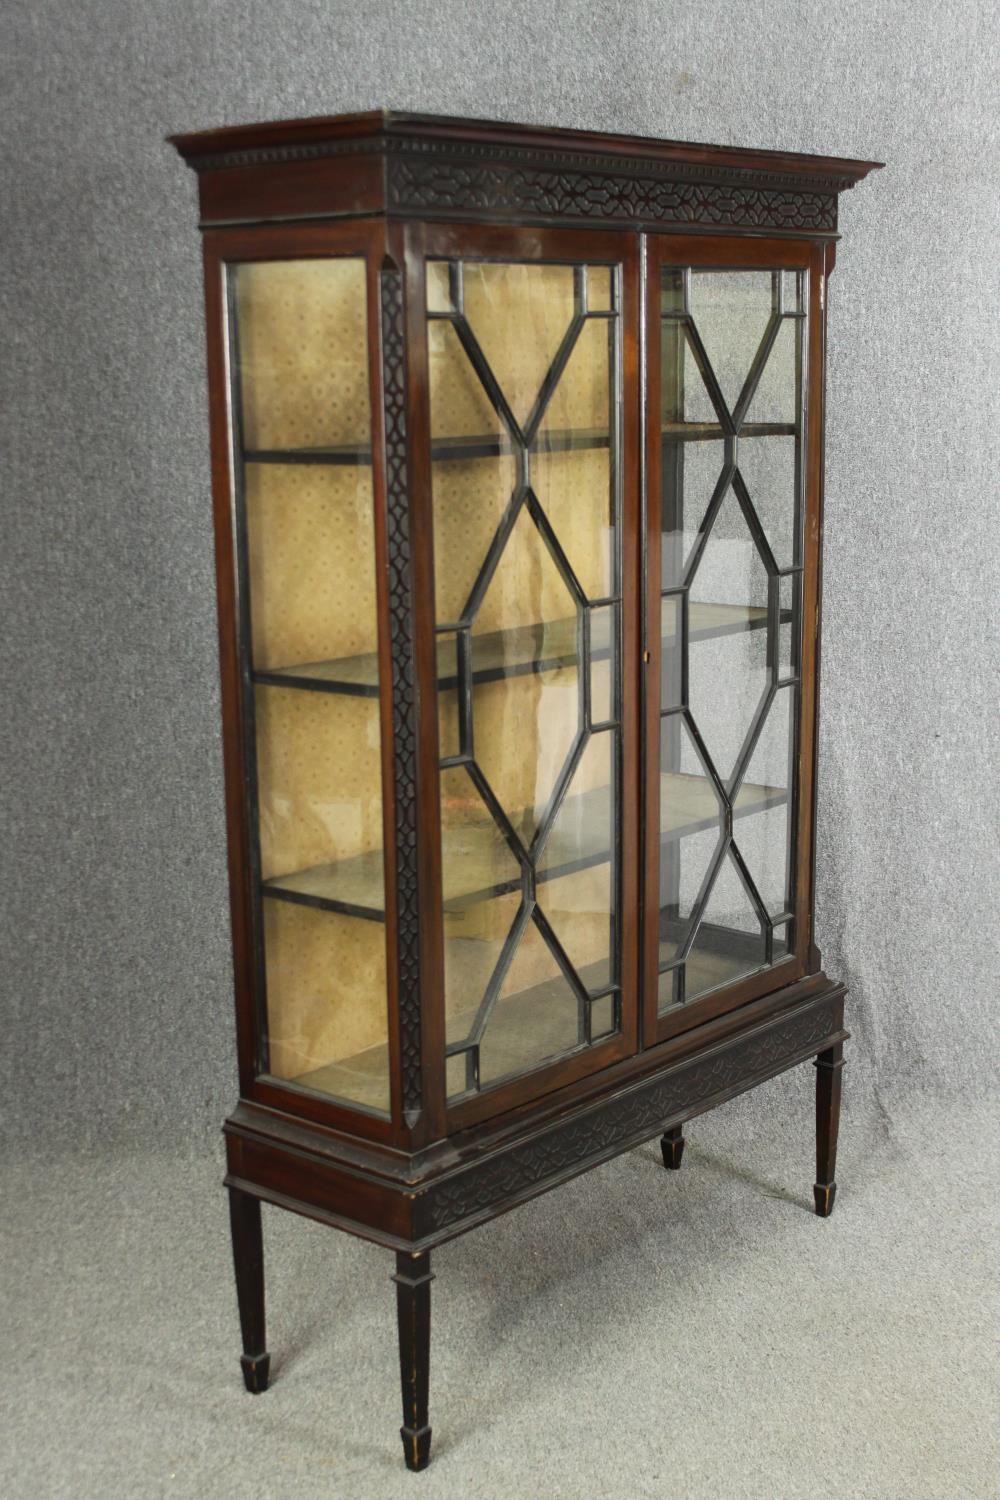 A George III style mahogany and astragal glazed display cabinet, early 20th century, H.173 W.112 D. - Image 2 of 5